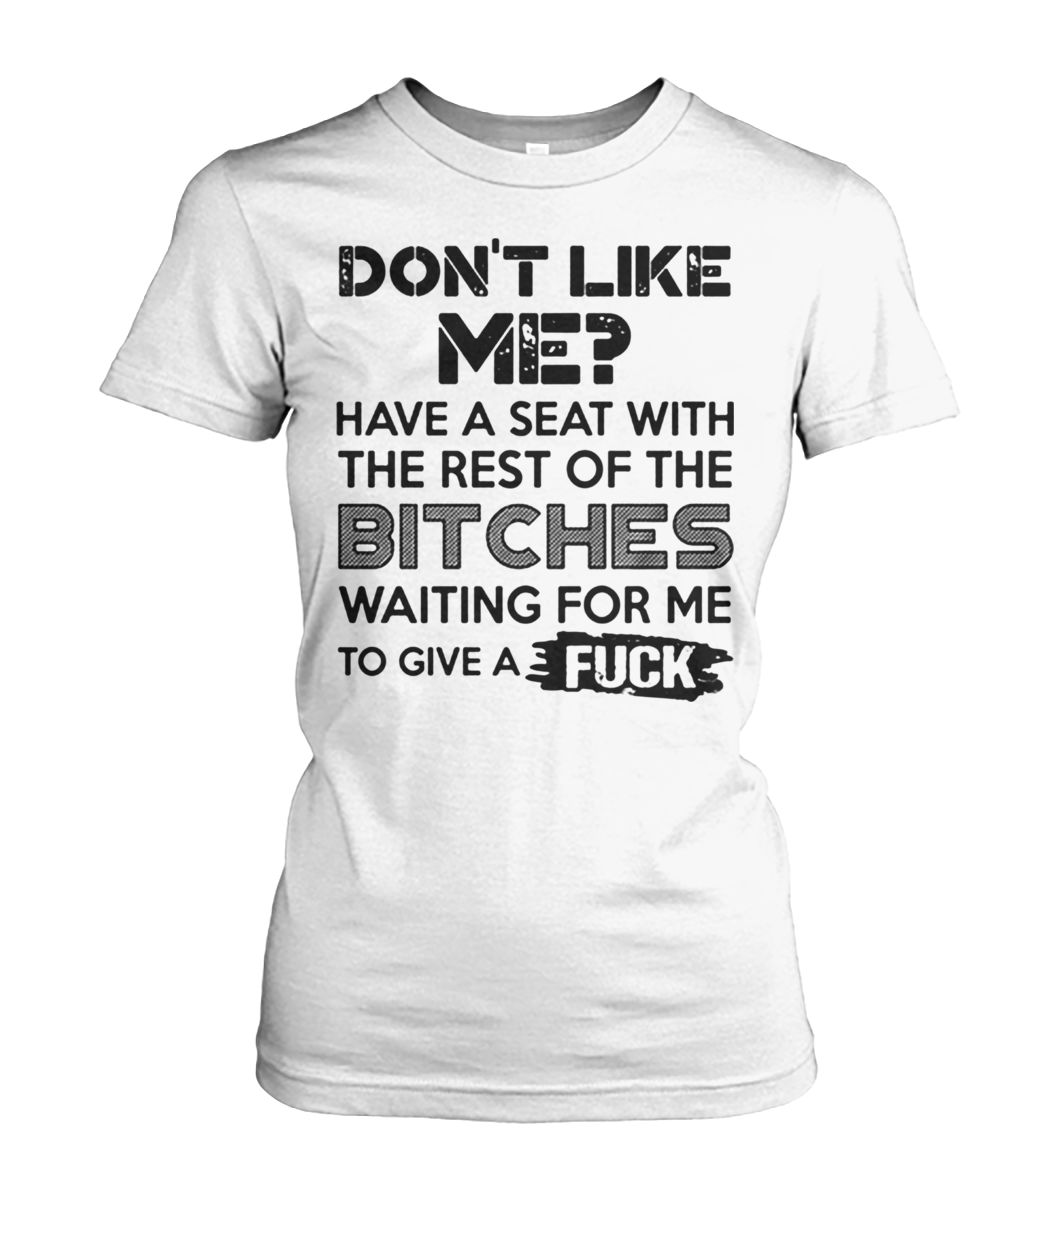 Don't like me have a seat with the rest of the bitches waiting for me women's crew tee